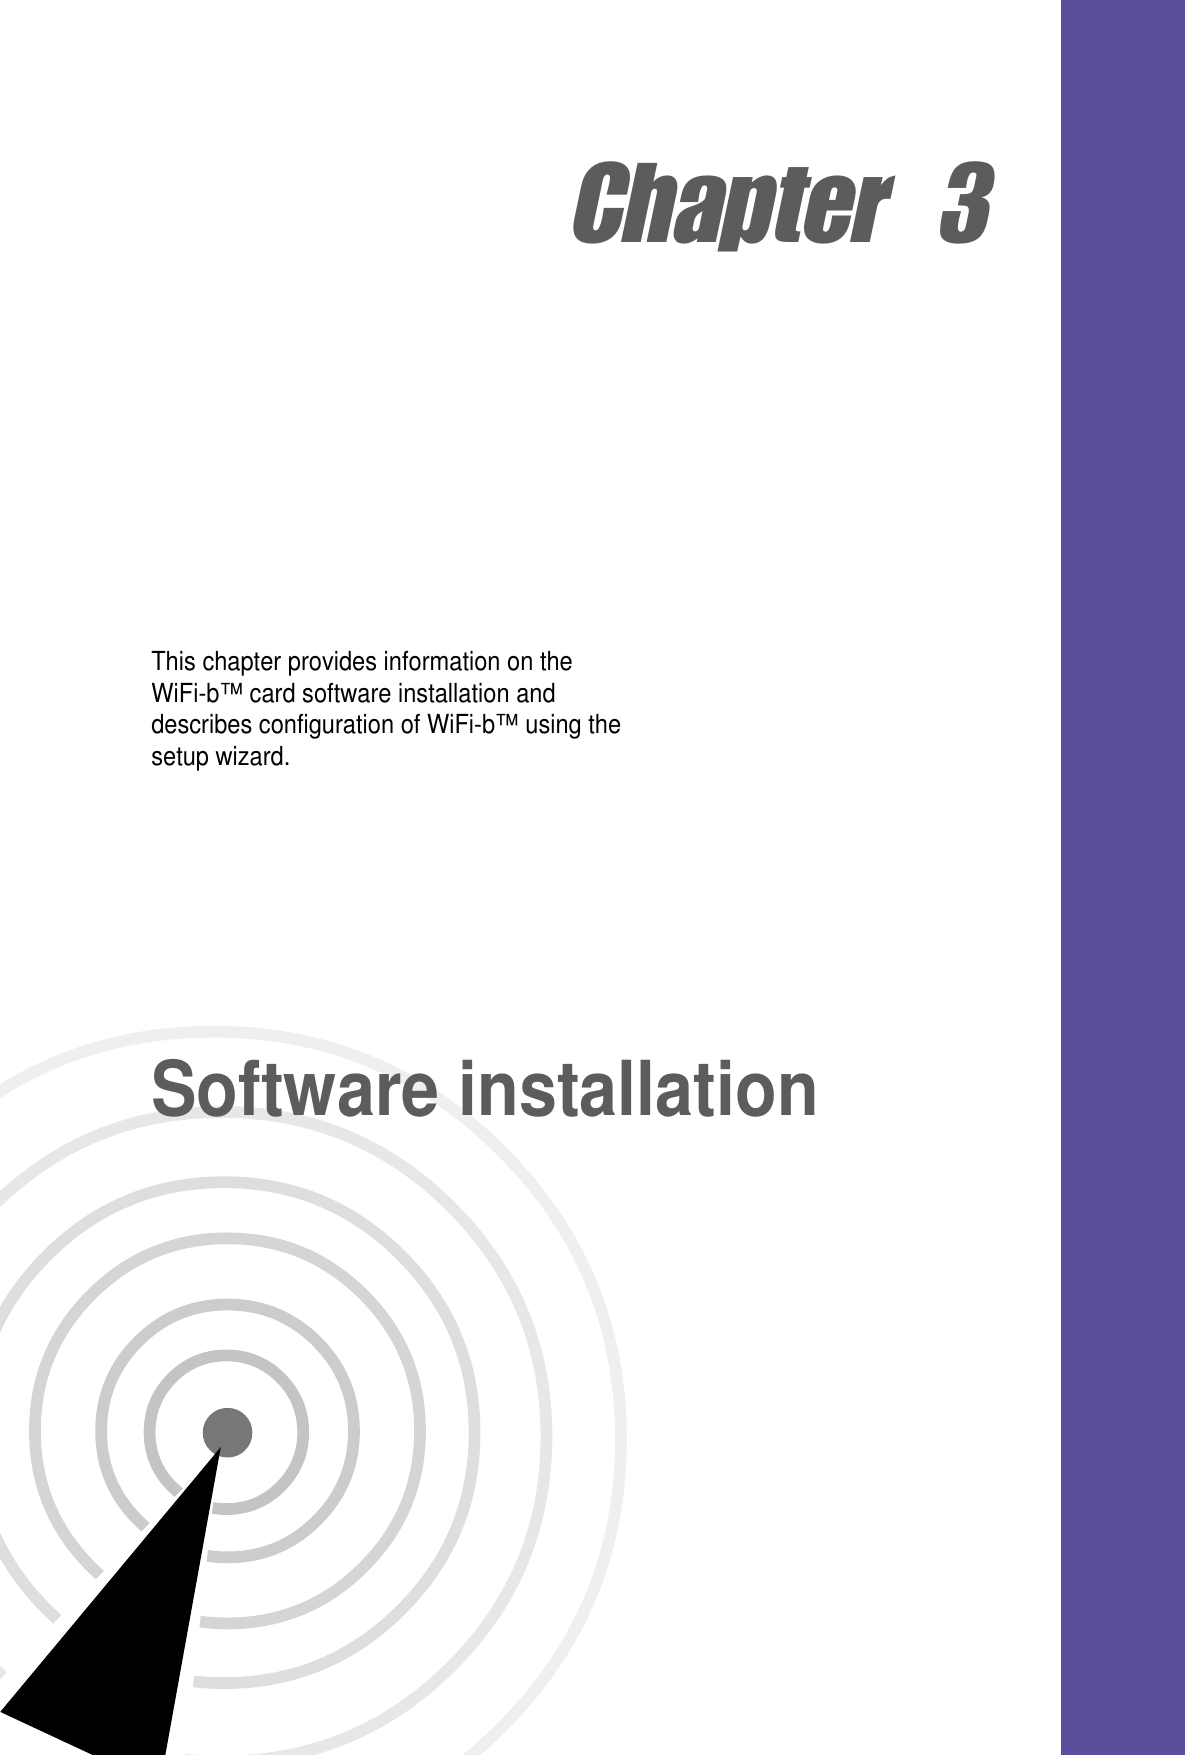 Chapter  3This chapter provides information on theWiFi-b™ card software installation anddescribes configuration of WiFi-b™ using thesetup wizard.Software installation